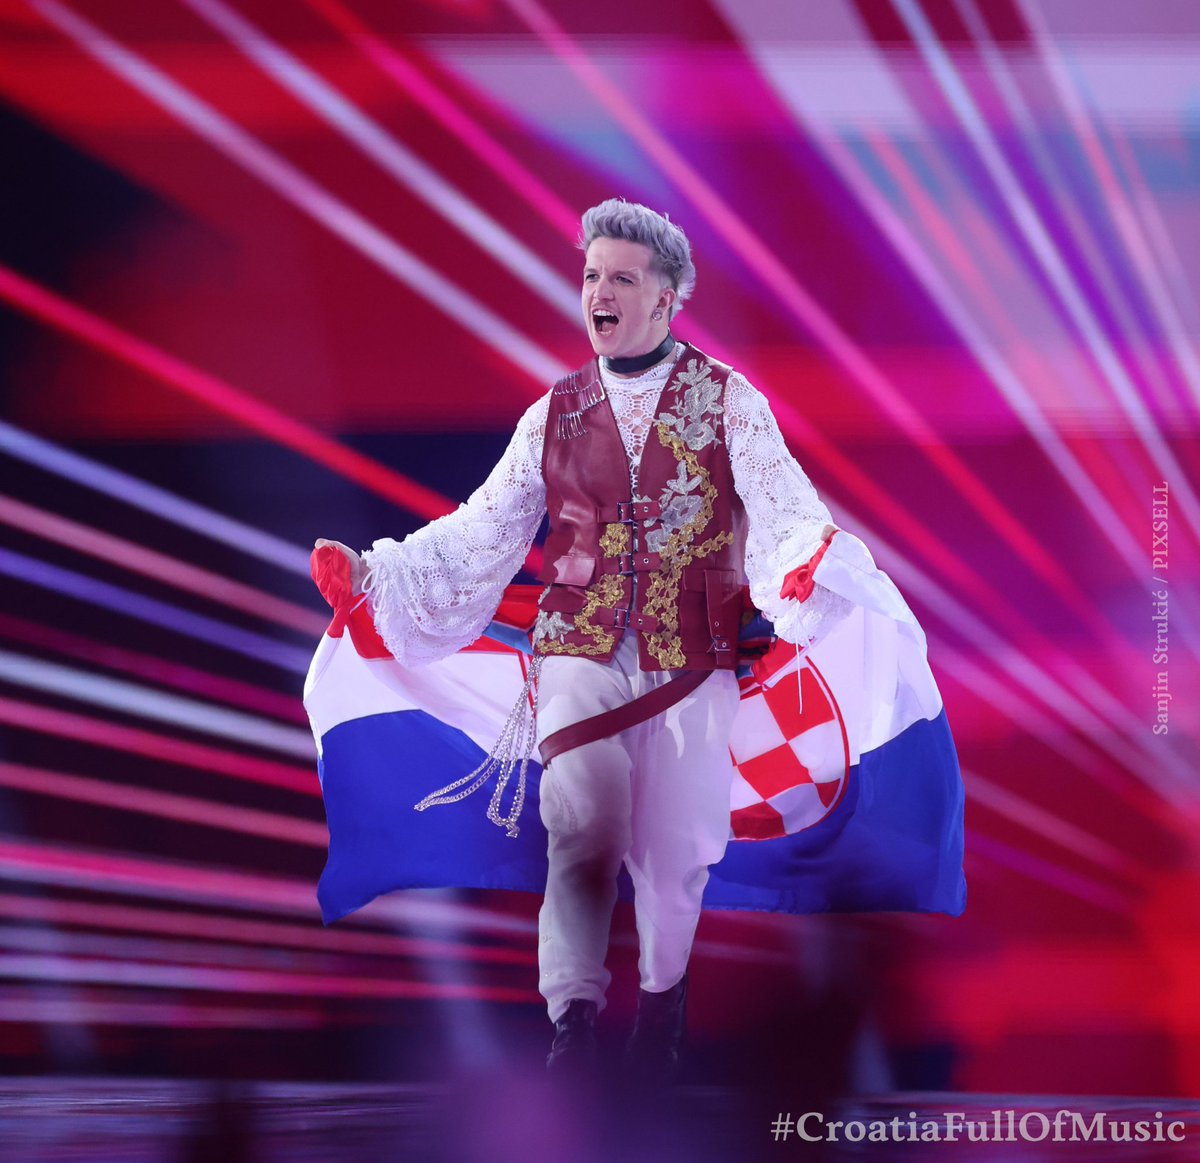 croatia got at least 5 points in televote from every country 🥹 baby lasagna you won the whole europe's hearts